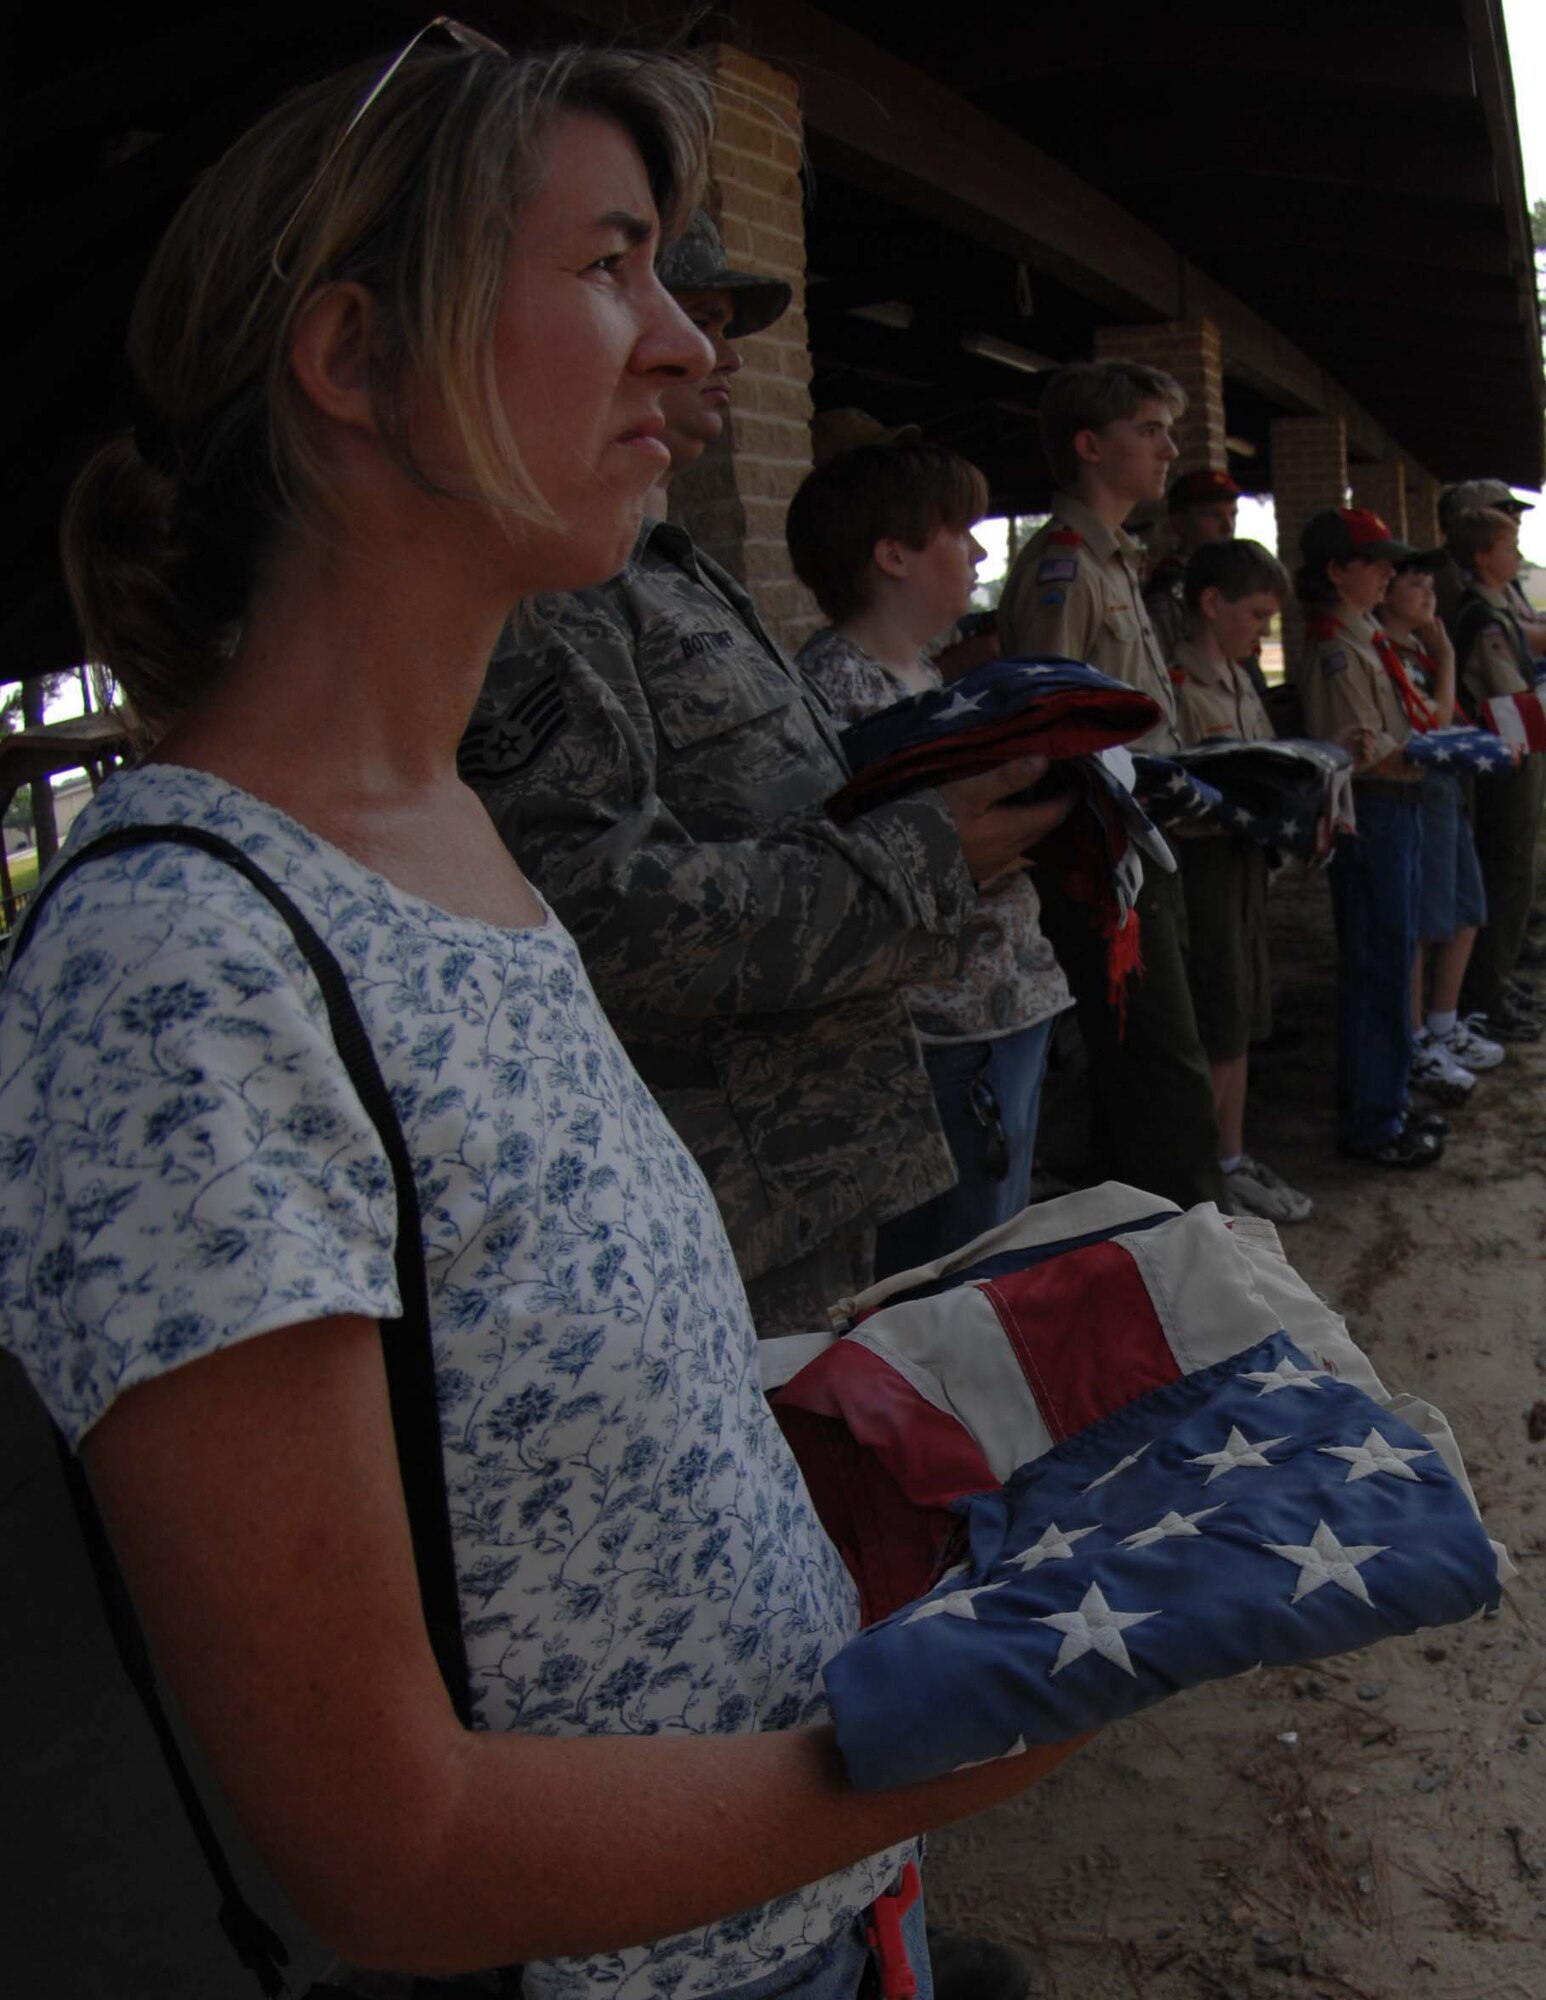 SEYMOUR JOHNSON AIR FORCE BASE, N.C. A member of the 4th Fighter Wing waits to retire her American flag during a flag retirement ceremony, June 14, 2008. (U.S. Air Force photo by Airman 1st Class Gino Reyes)